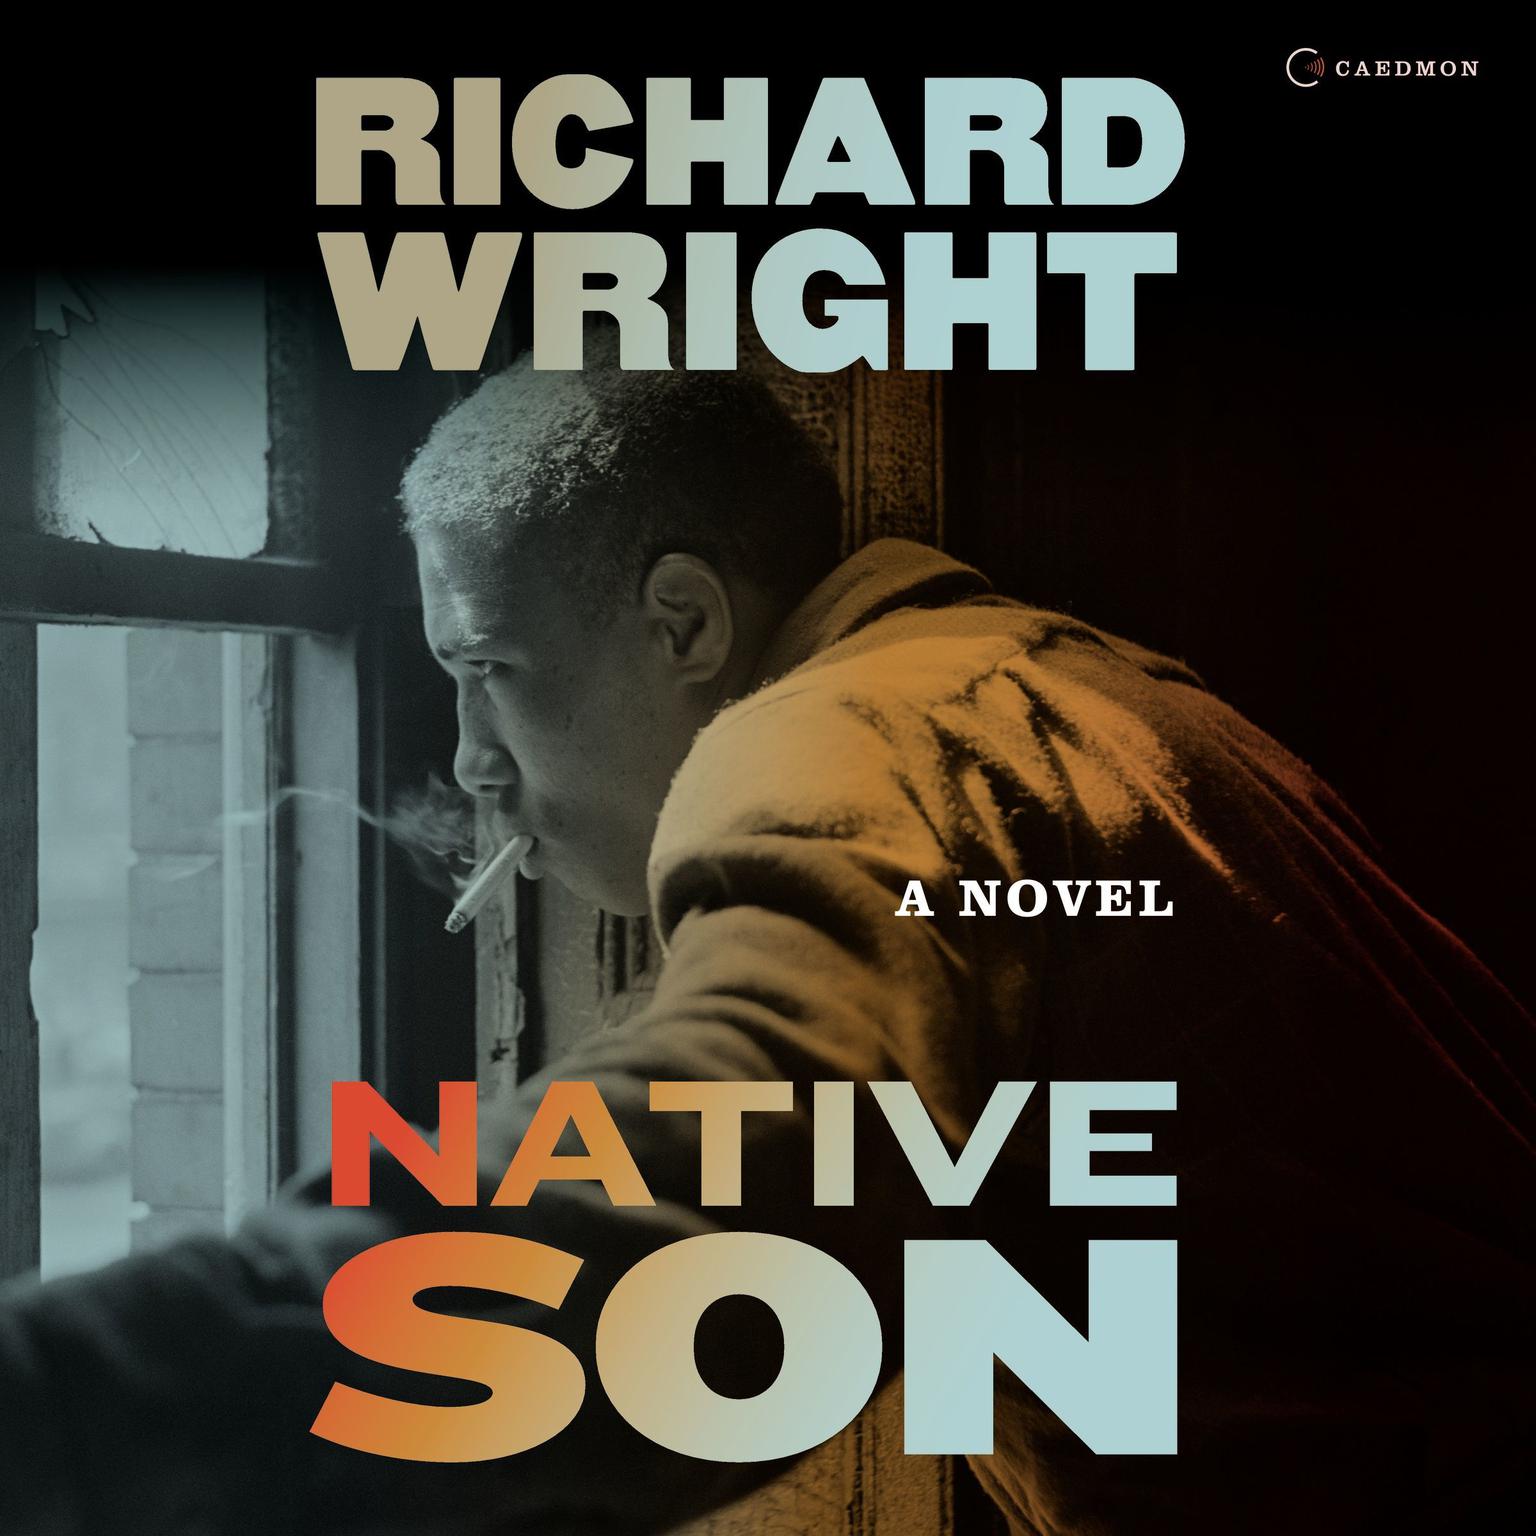 Native Son Audiobook, by Richard Wright